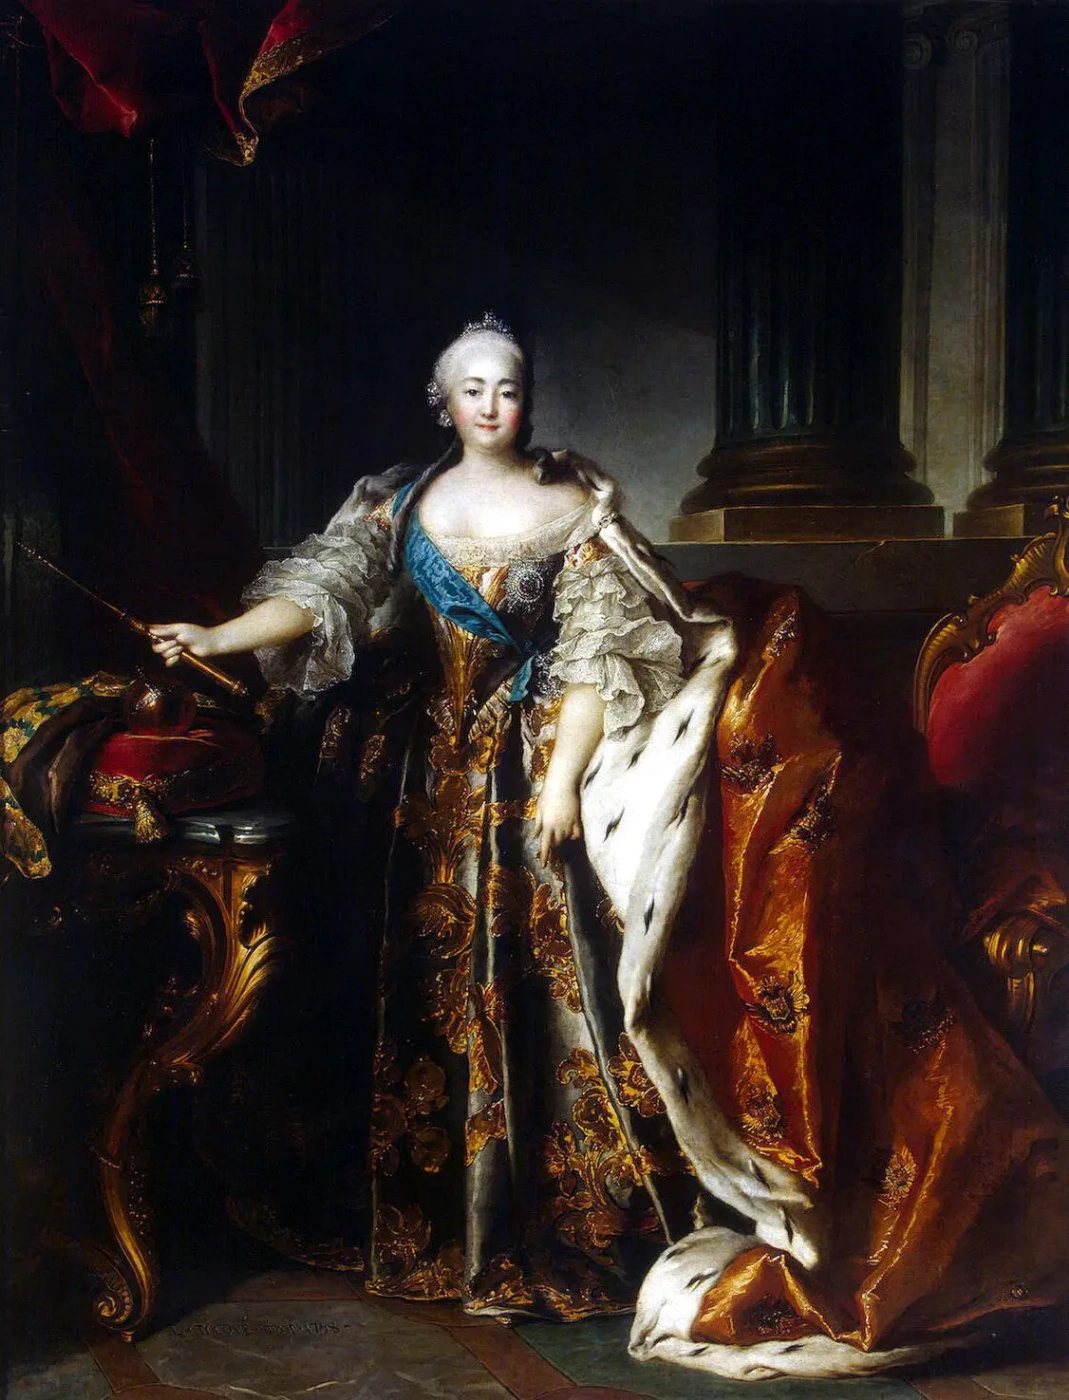 Louis Tocqué, Portrait of Elisabeth I of Russia, 1756, Tretyakov gallery, Moscow, Russia.